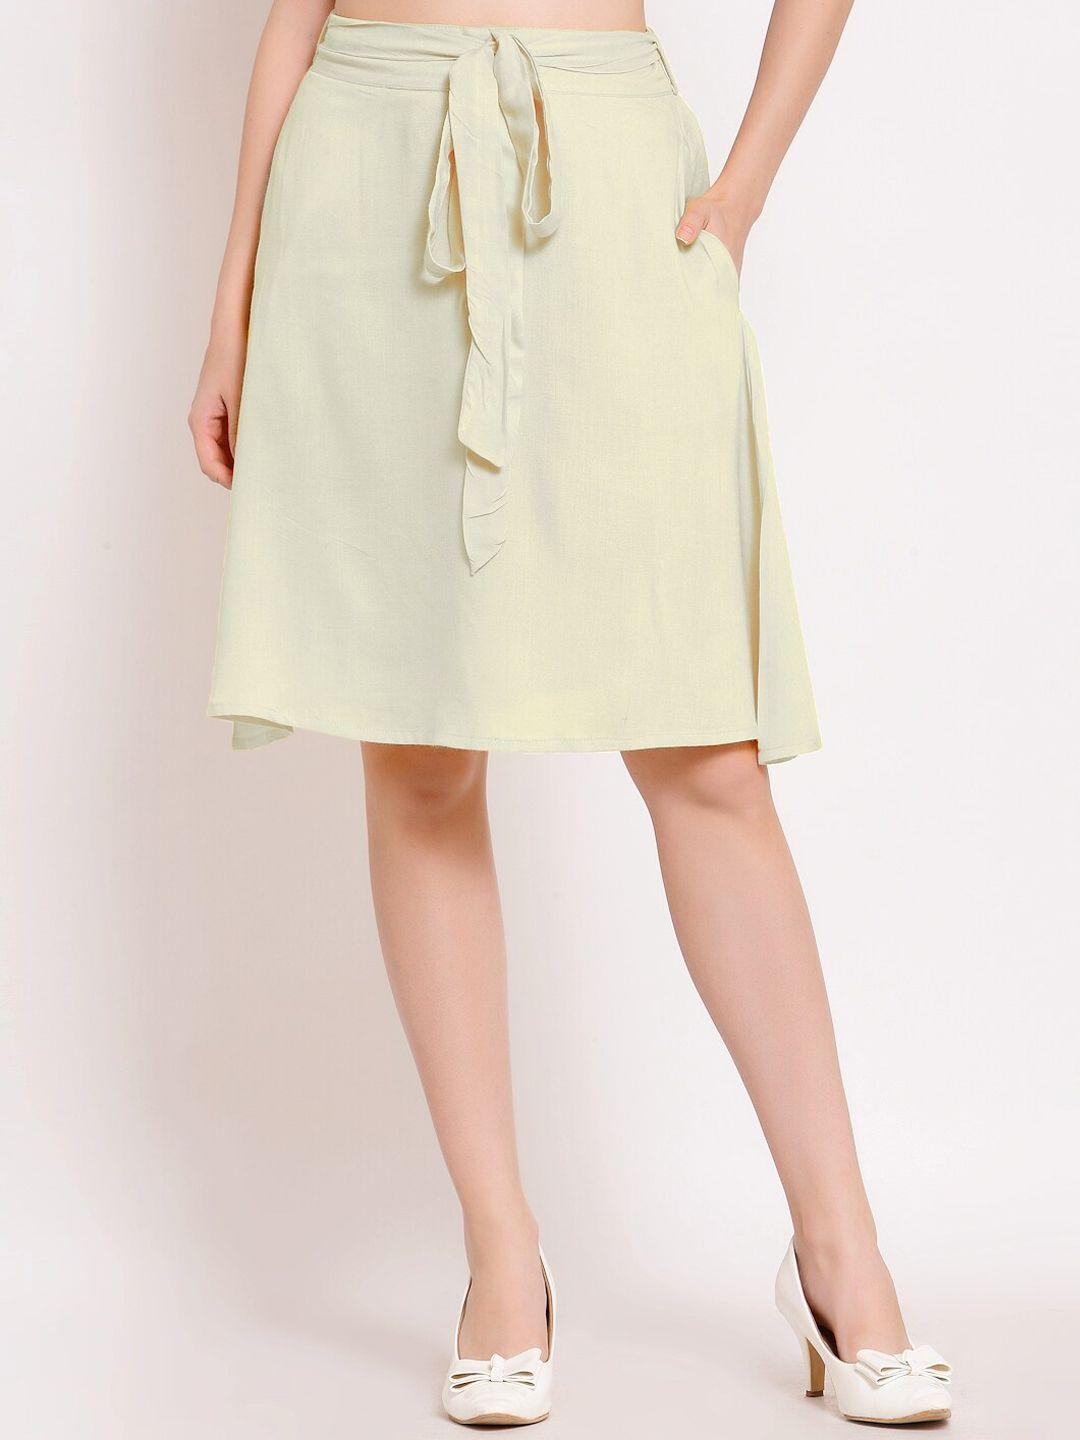 patrorna women off white solid a-line skirt